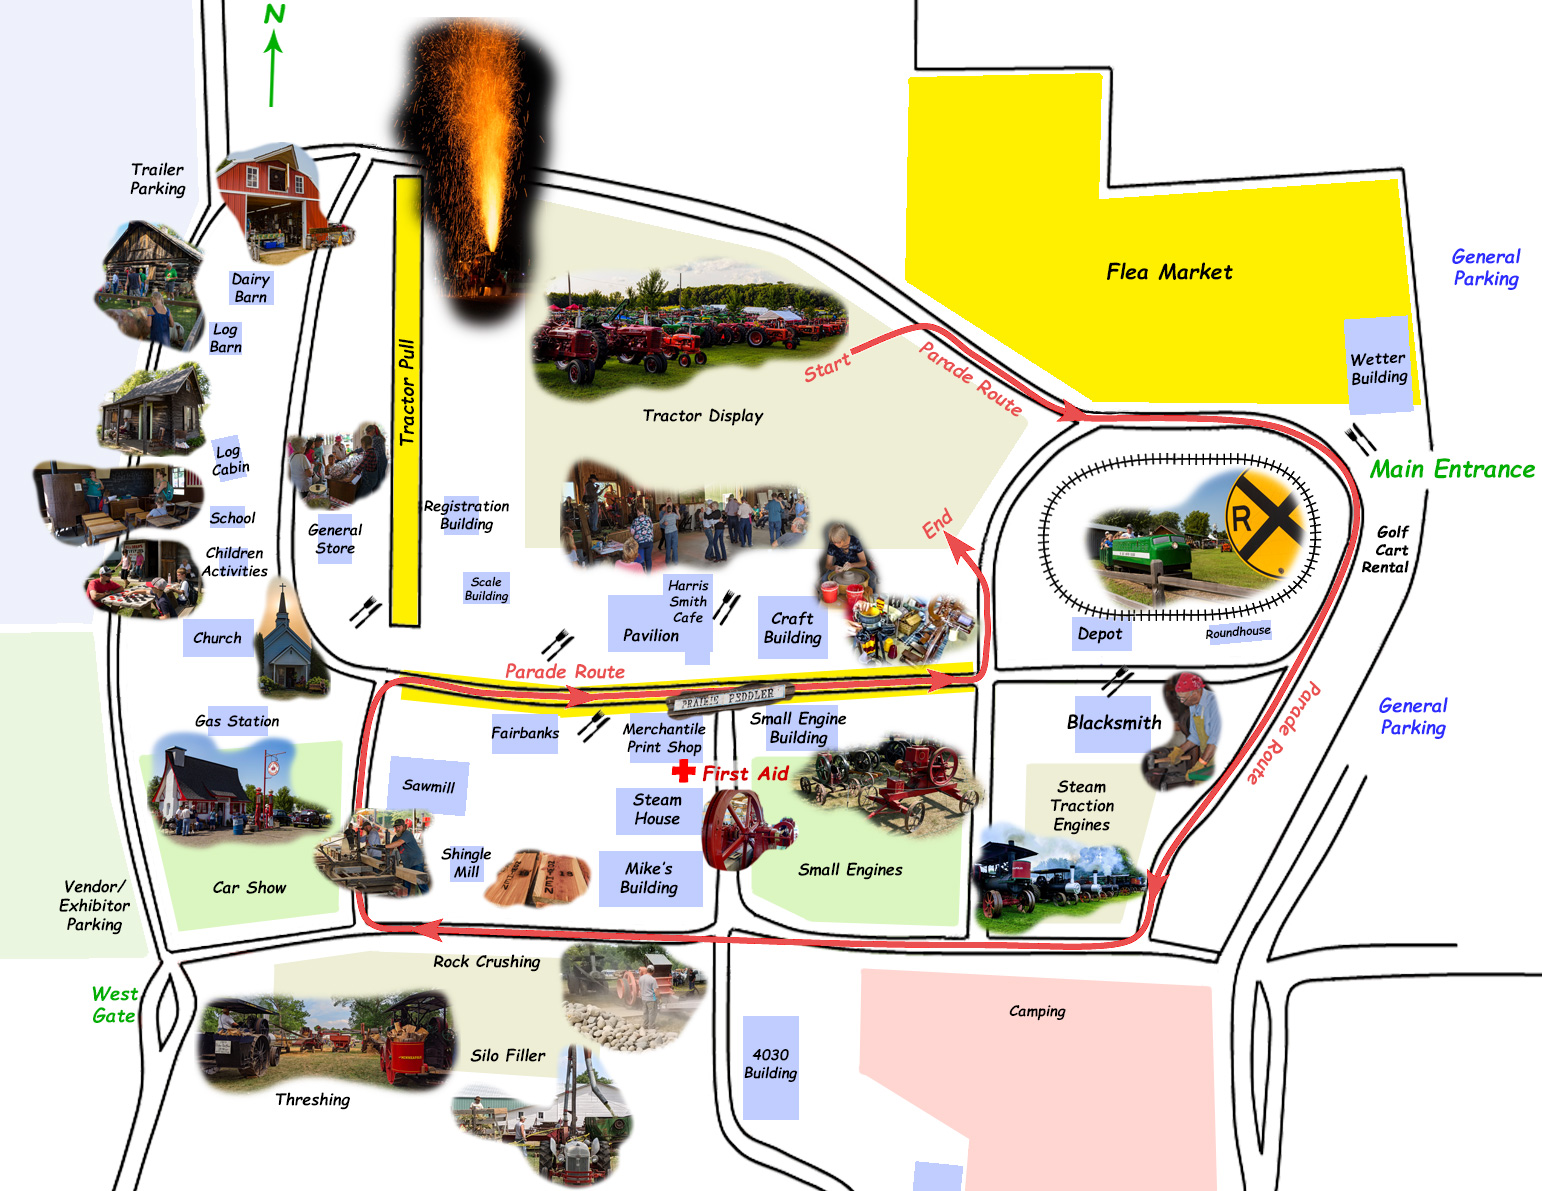 Map of the Show Grounds